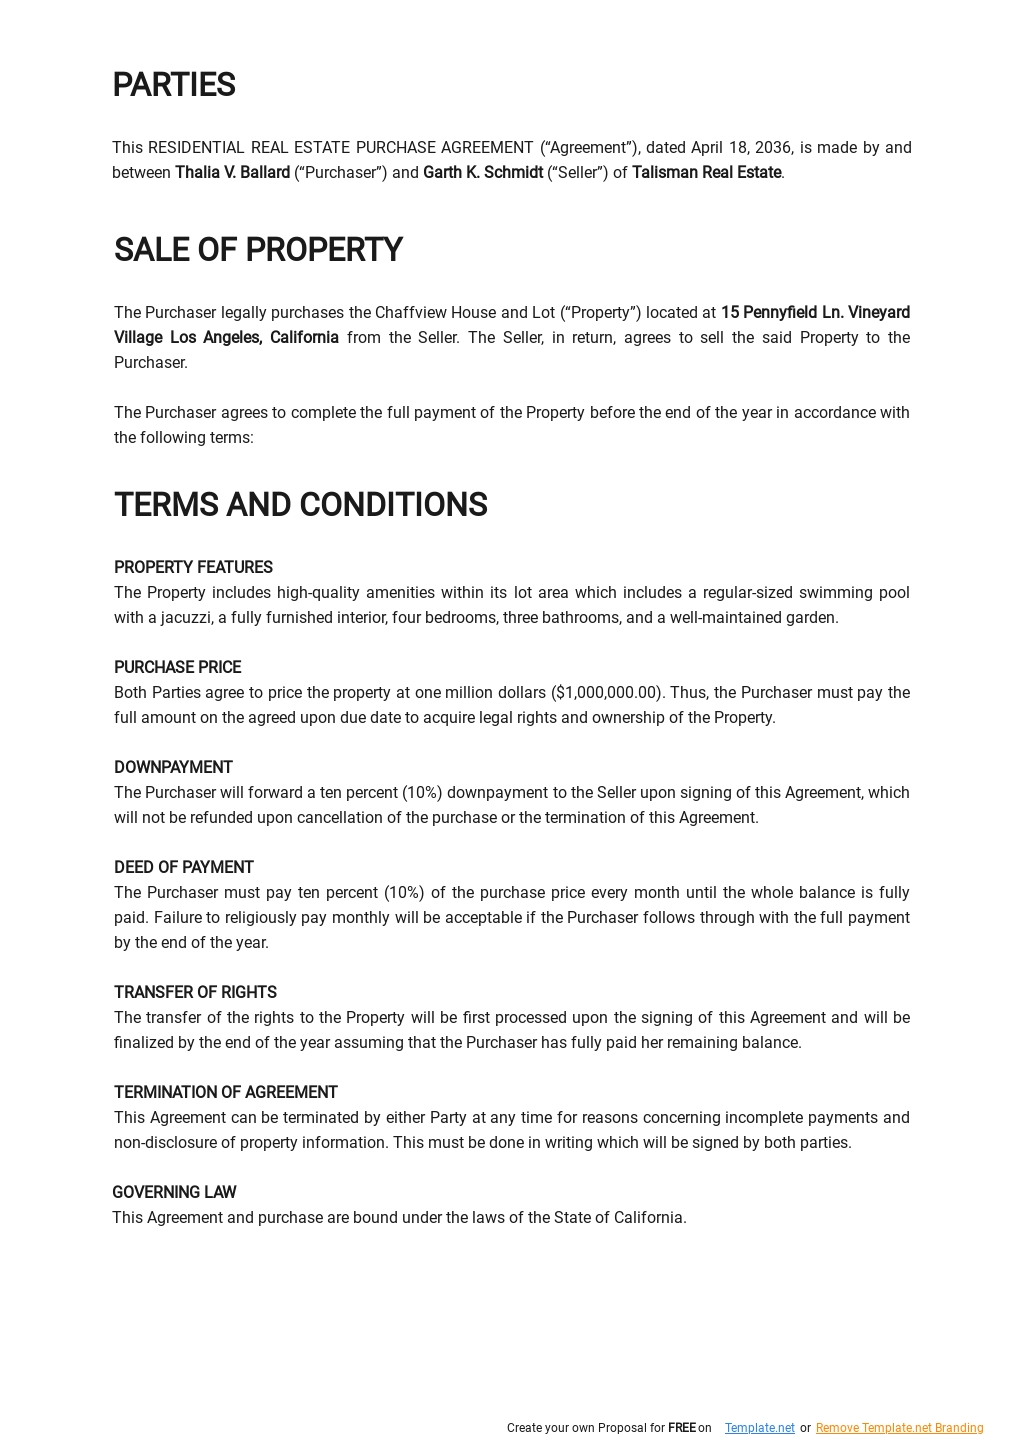 Sample Residential Real Estate Purchase Agreement Template 1.jpe